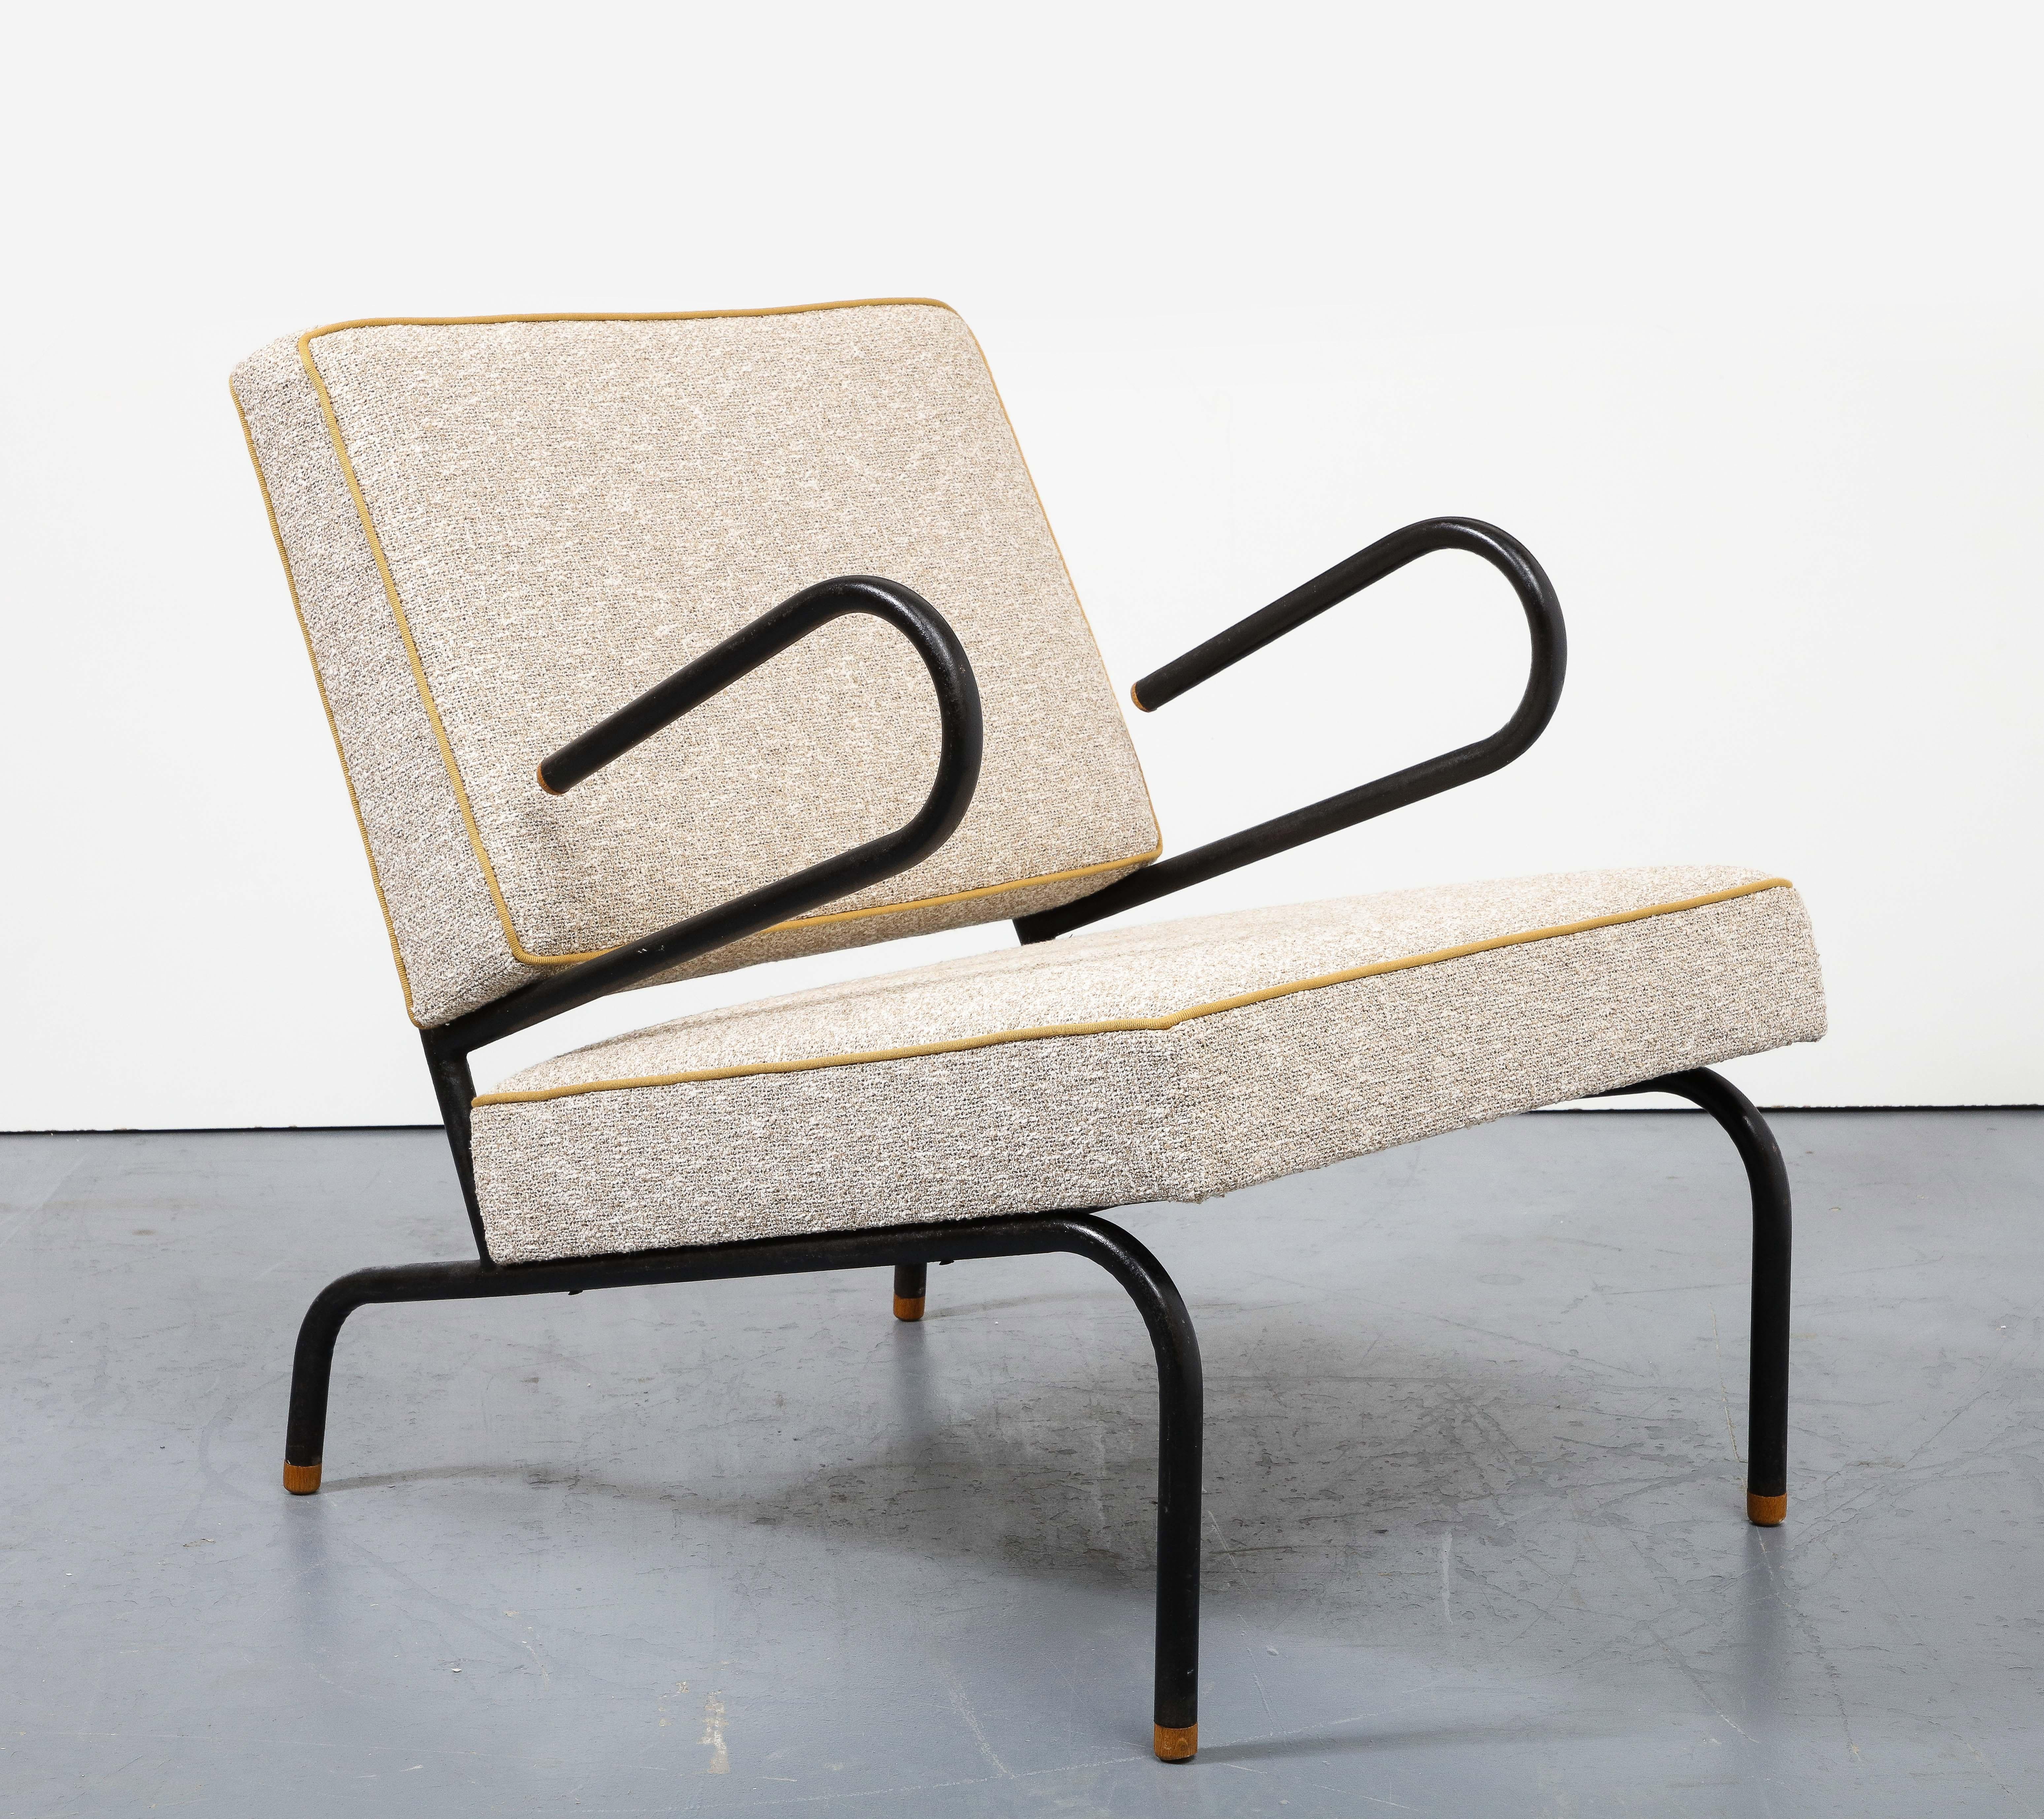 Bent Steel Lounge Chair by Jacques Hitier for Tubauto, France, c. 1955 For Sale 3